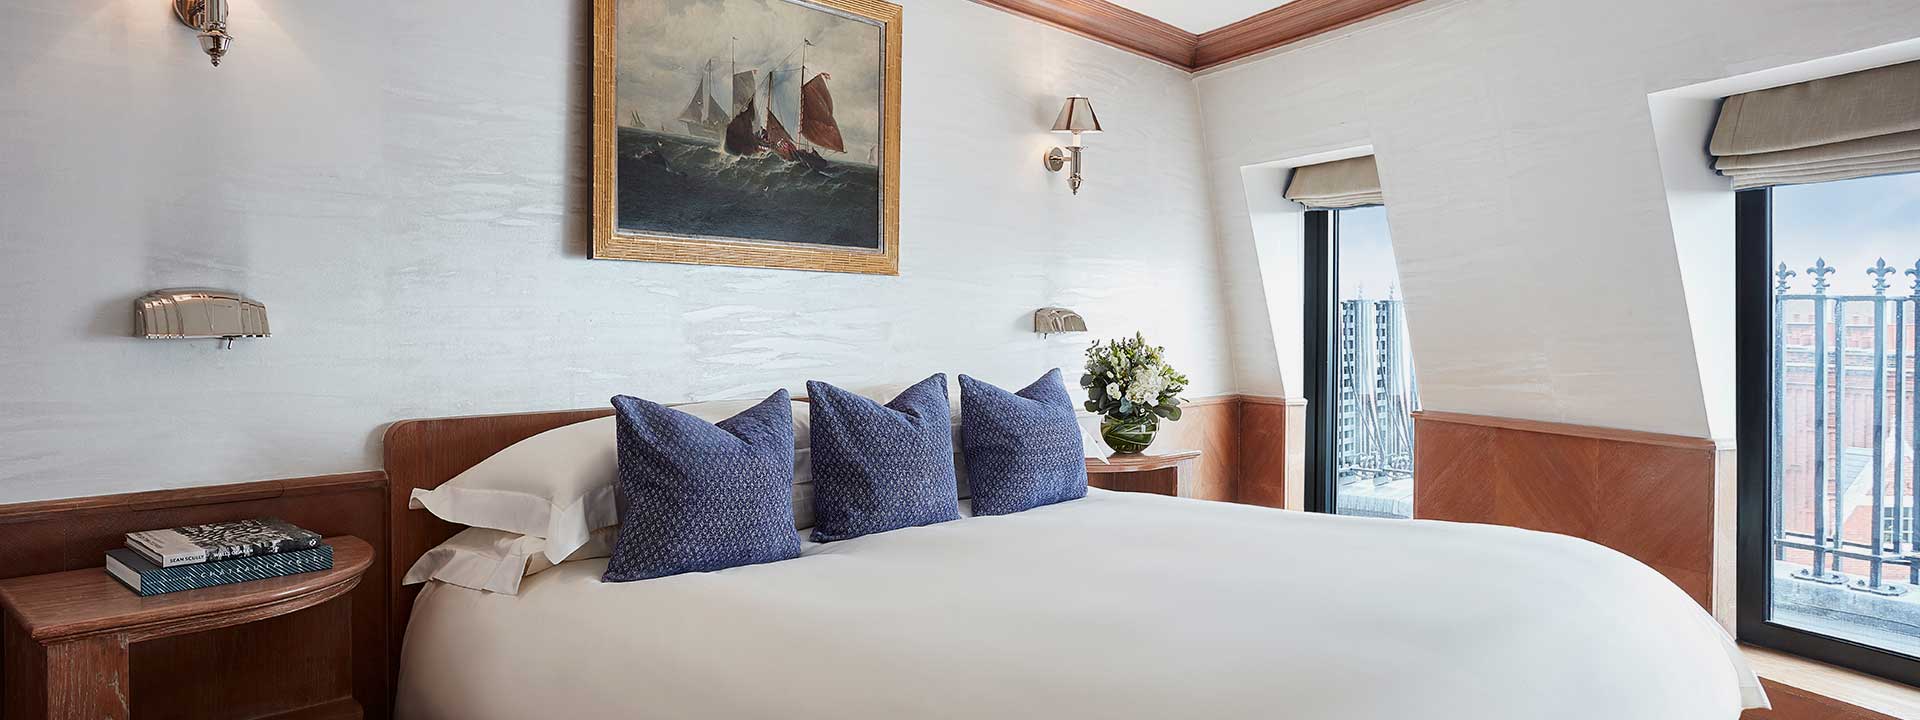 A view of a bedroom and King Bed in a nautical-style interior at The Eagles Lodge, The Connaught.